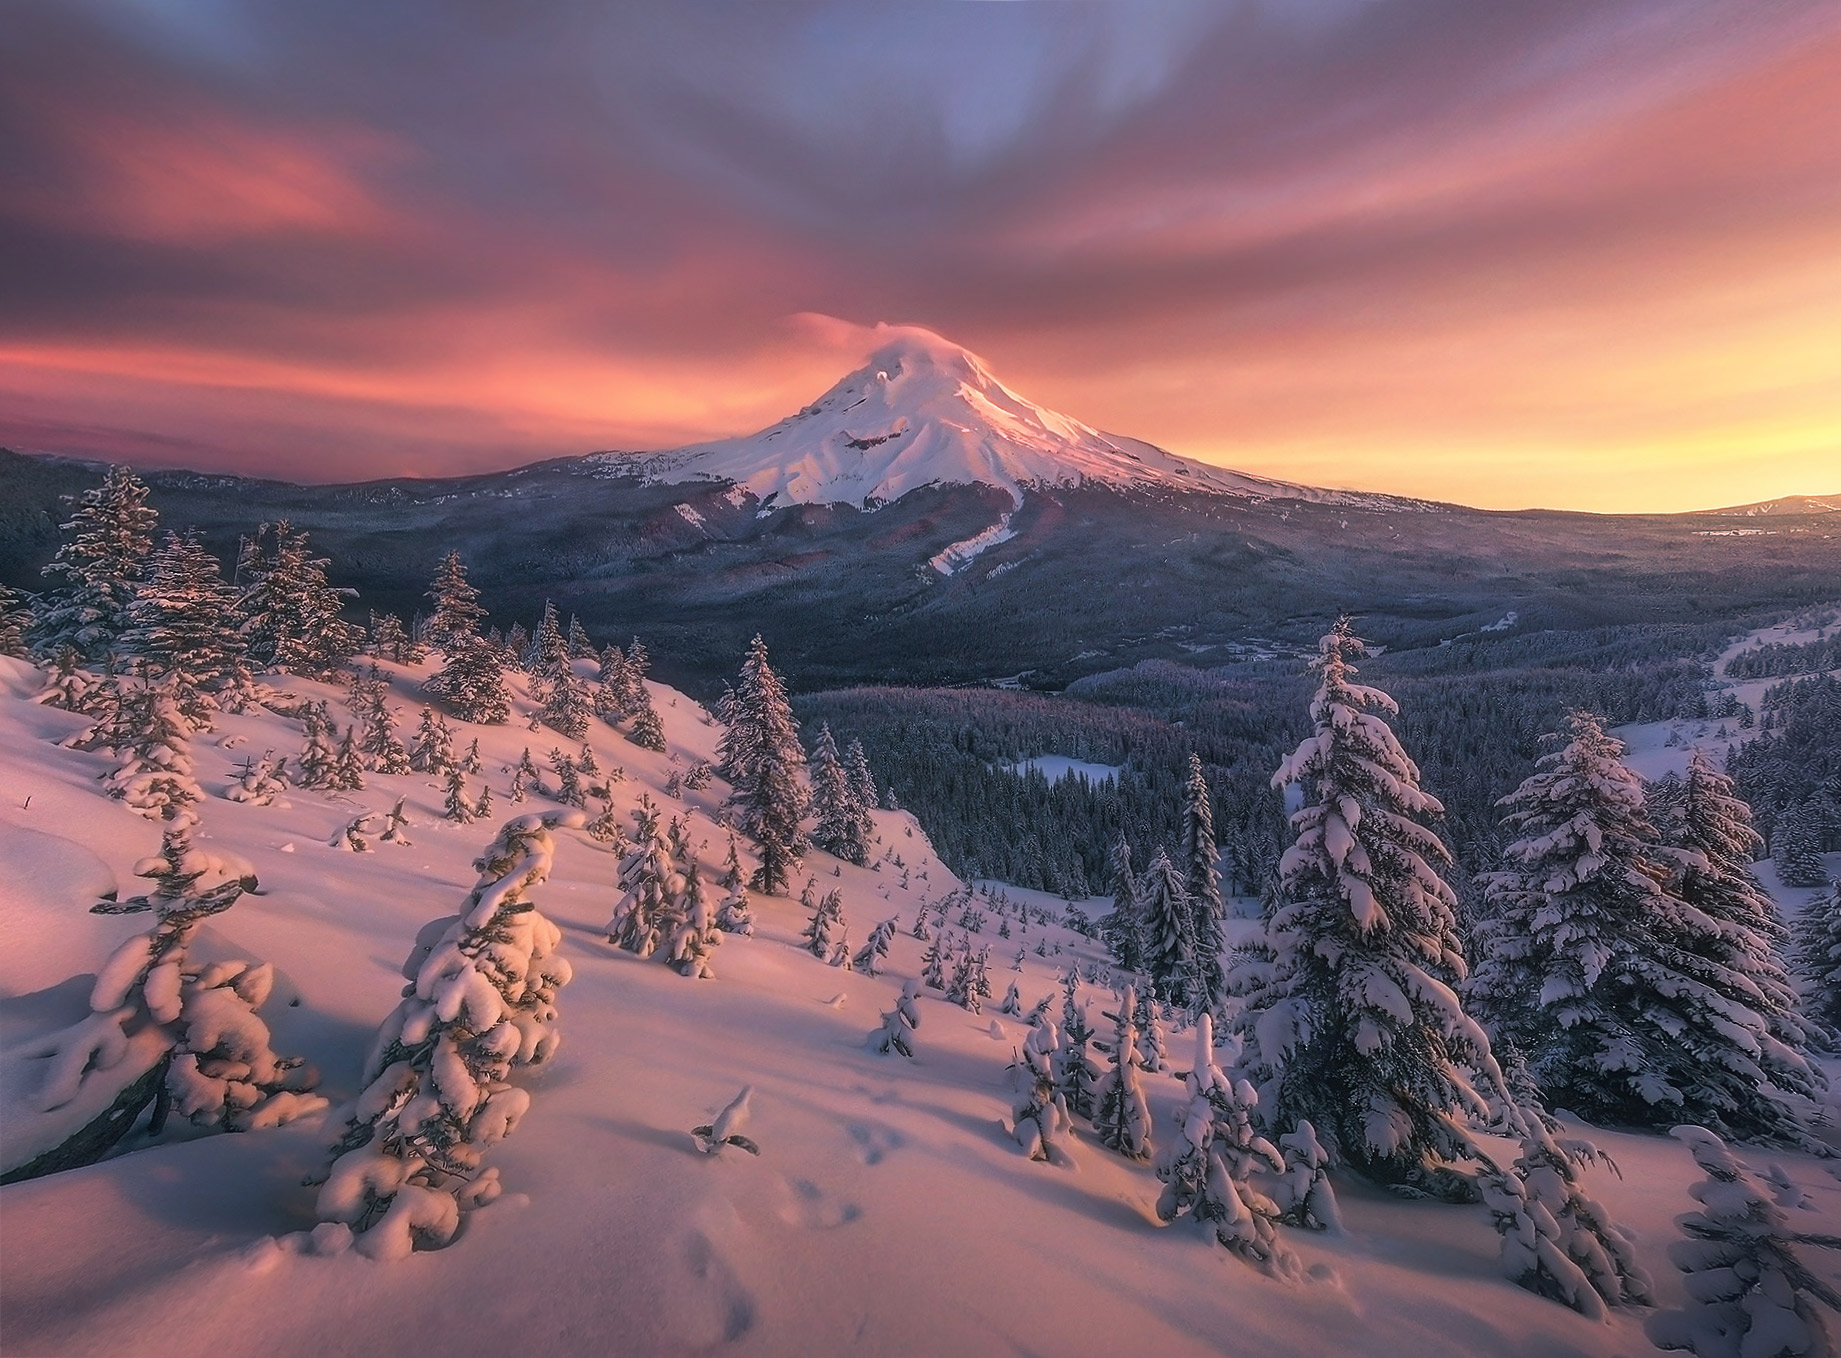 The beautiful reflected light of a spectacular sunrise adorns the frozen landscape surrounding Mount Hood in Oregon